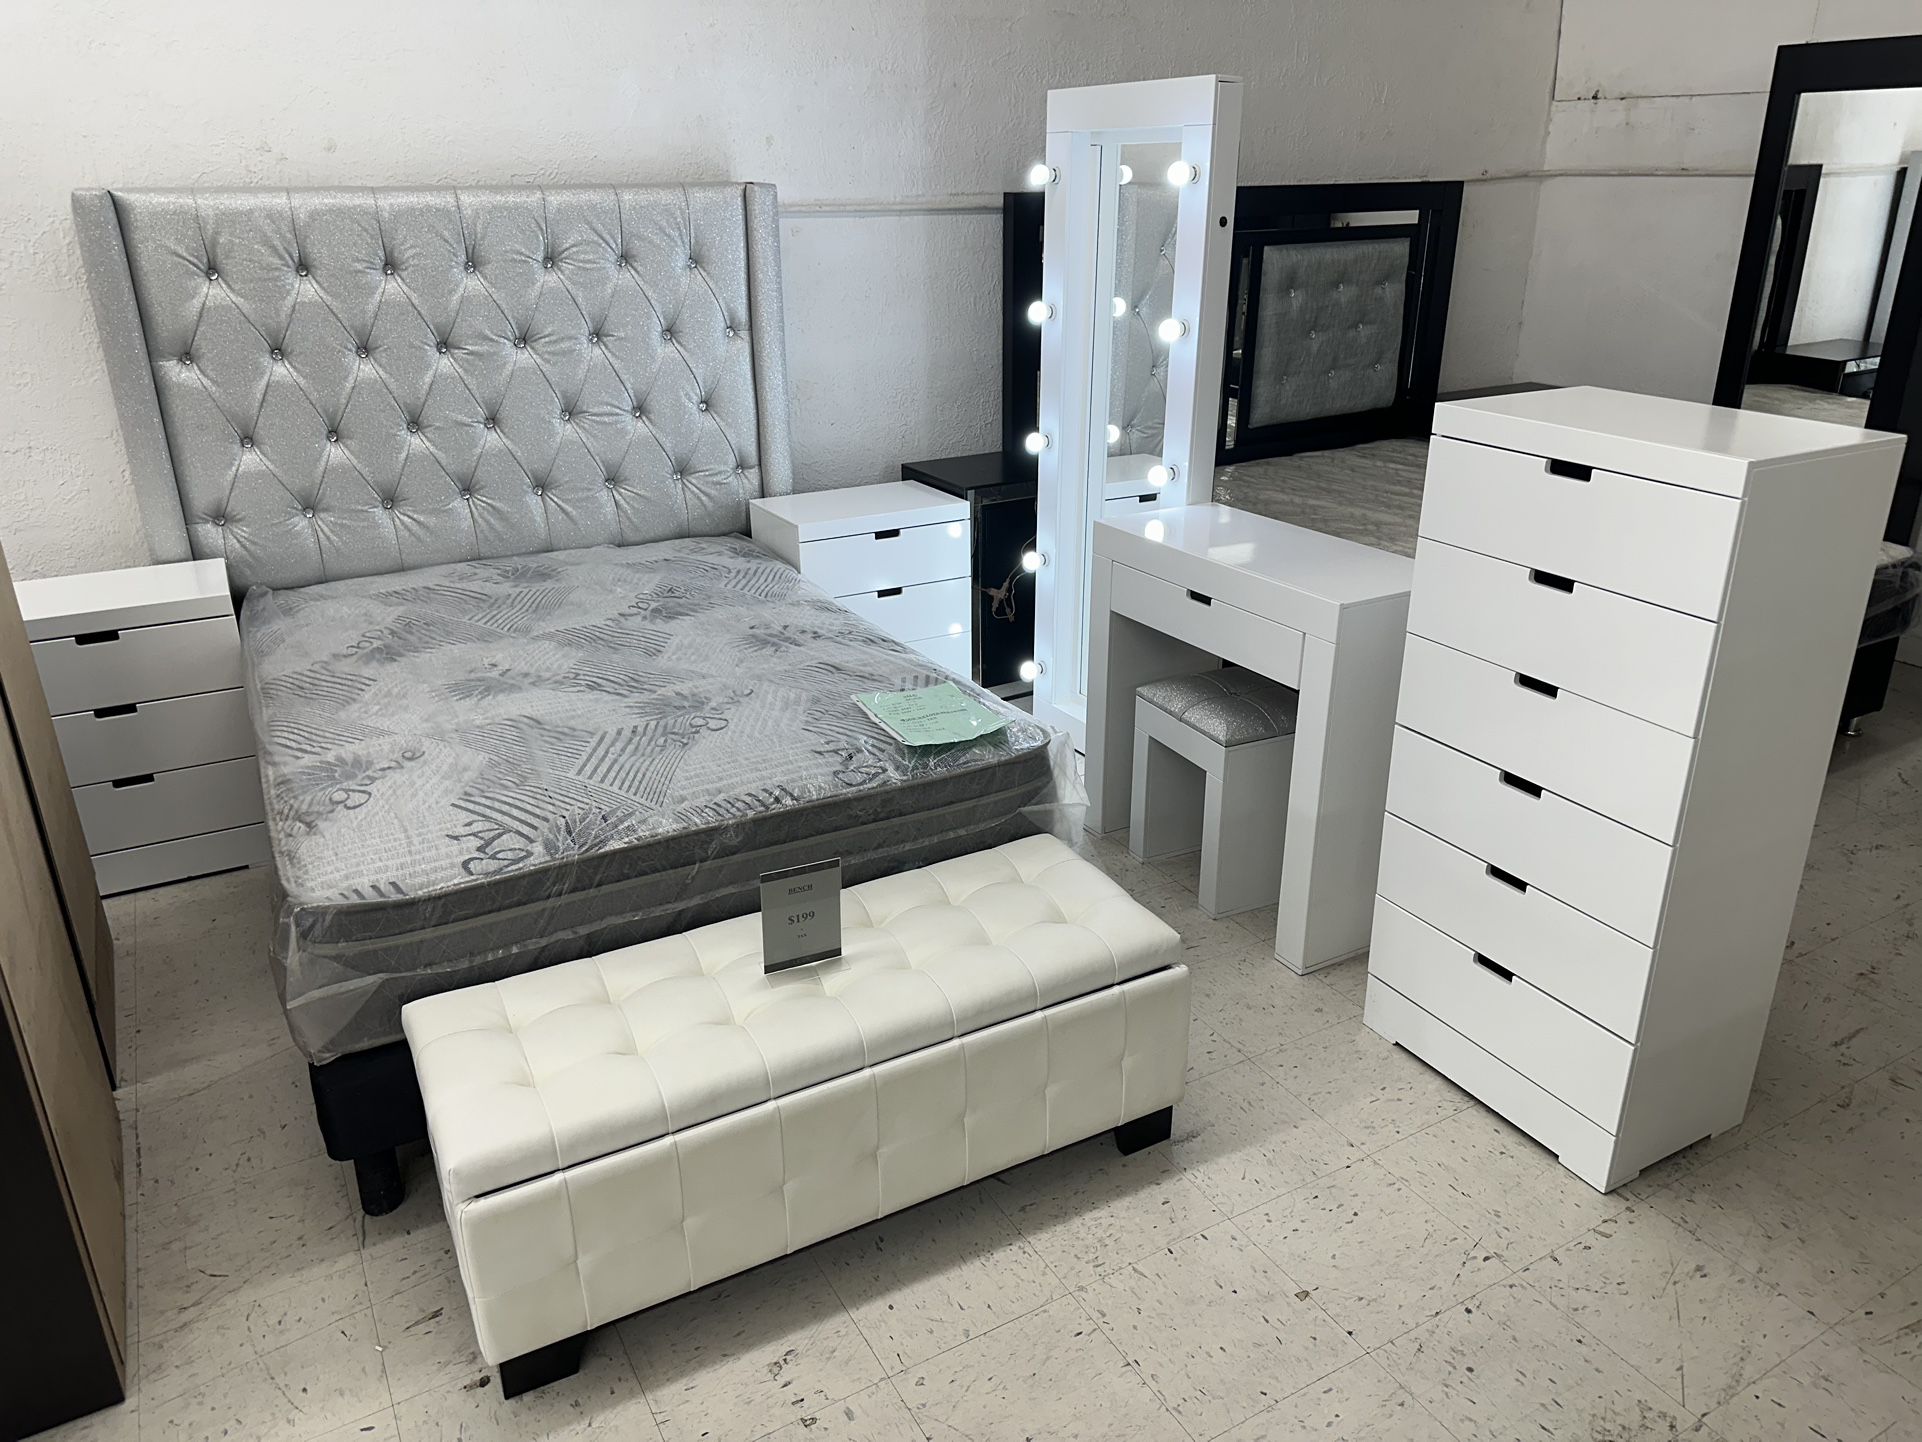 New White Bedroom Set With Full Body Hollywood Mirror (Queen/Full/Twin)